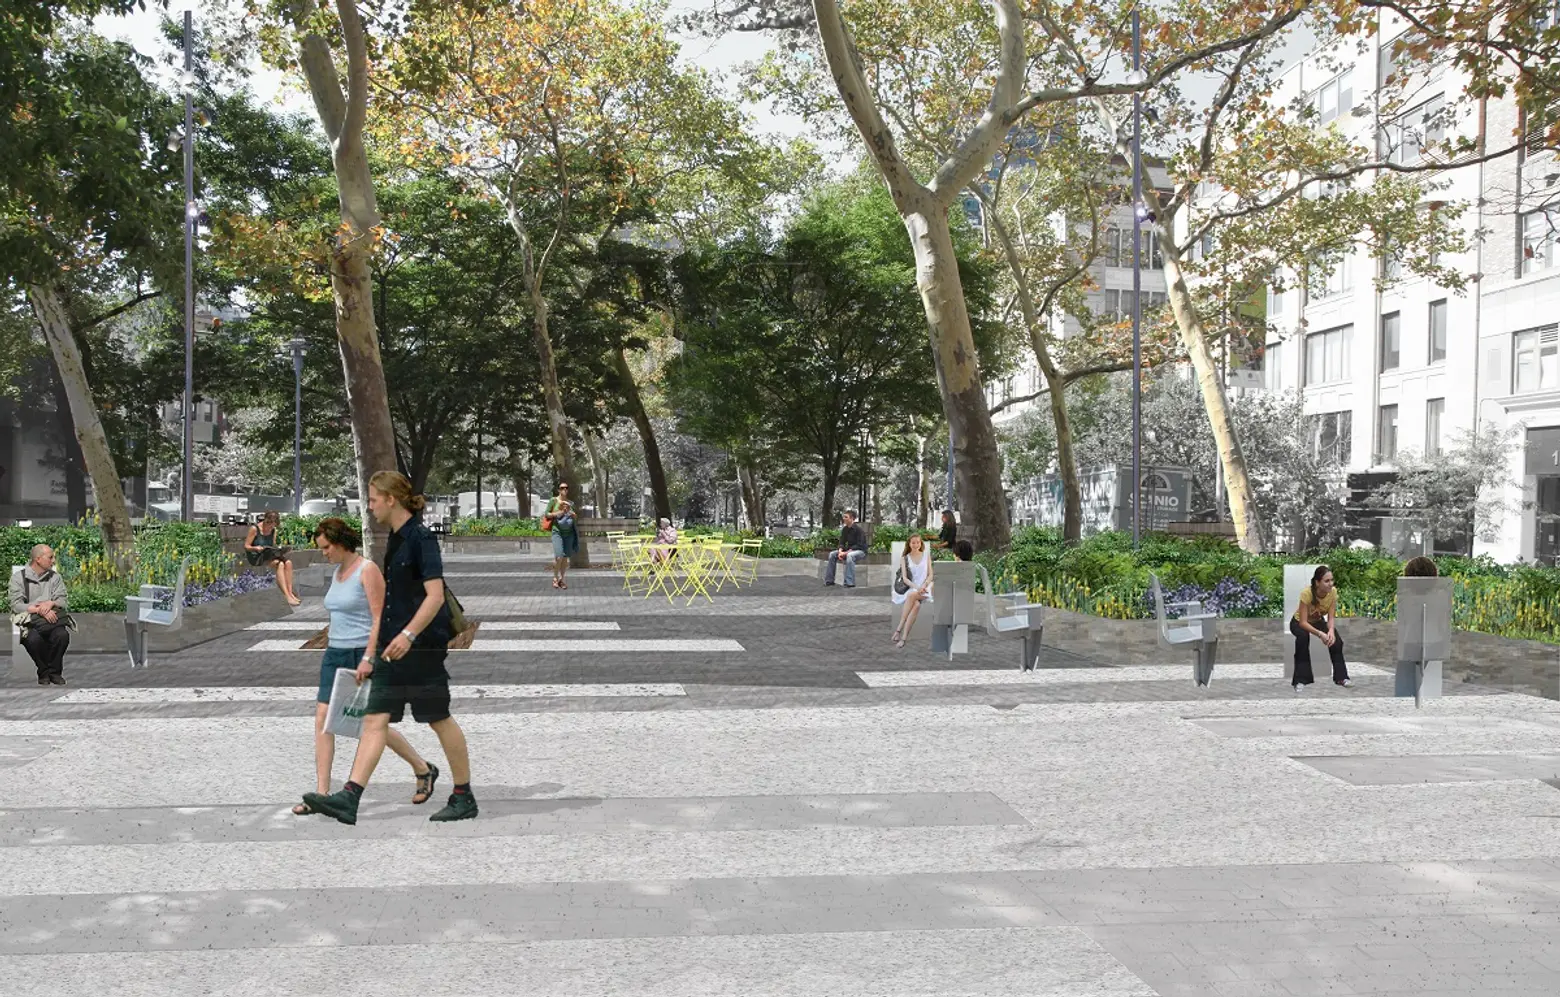 Renderings Revealed for Sustainable Hudson Square Park by Mathews Nielsen Landscape Architects